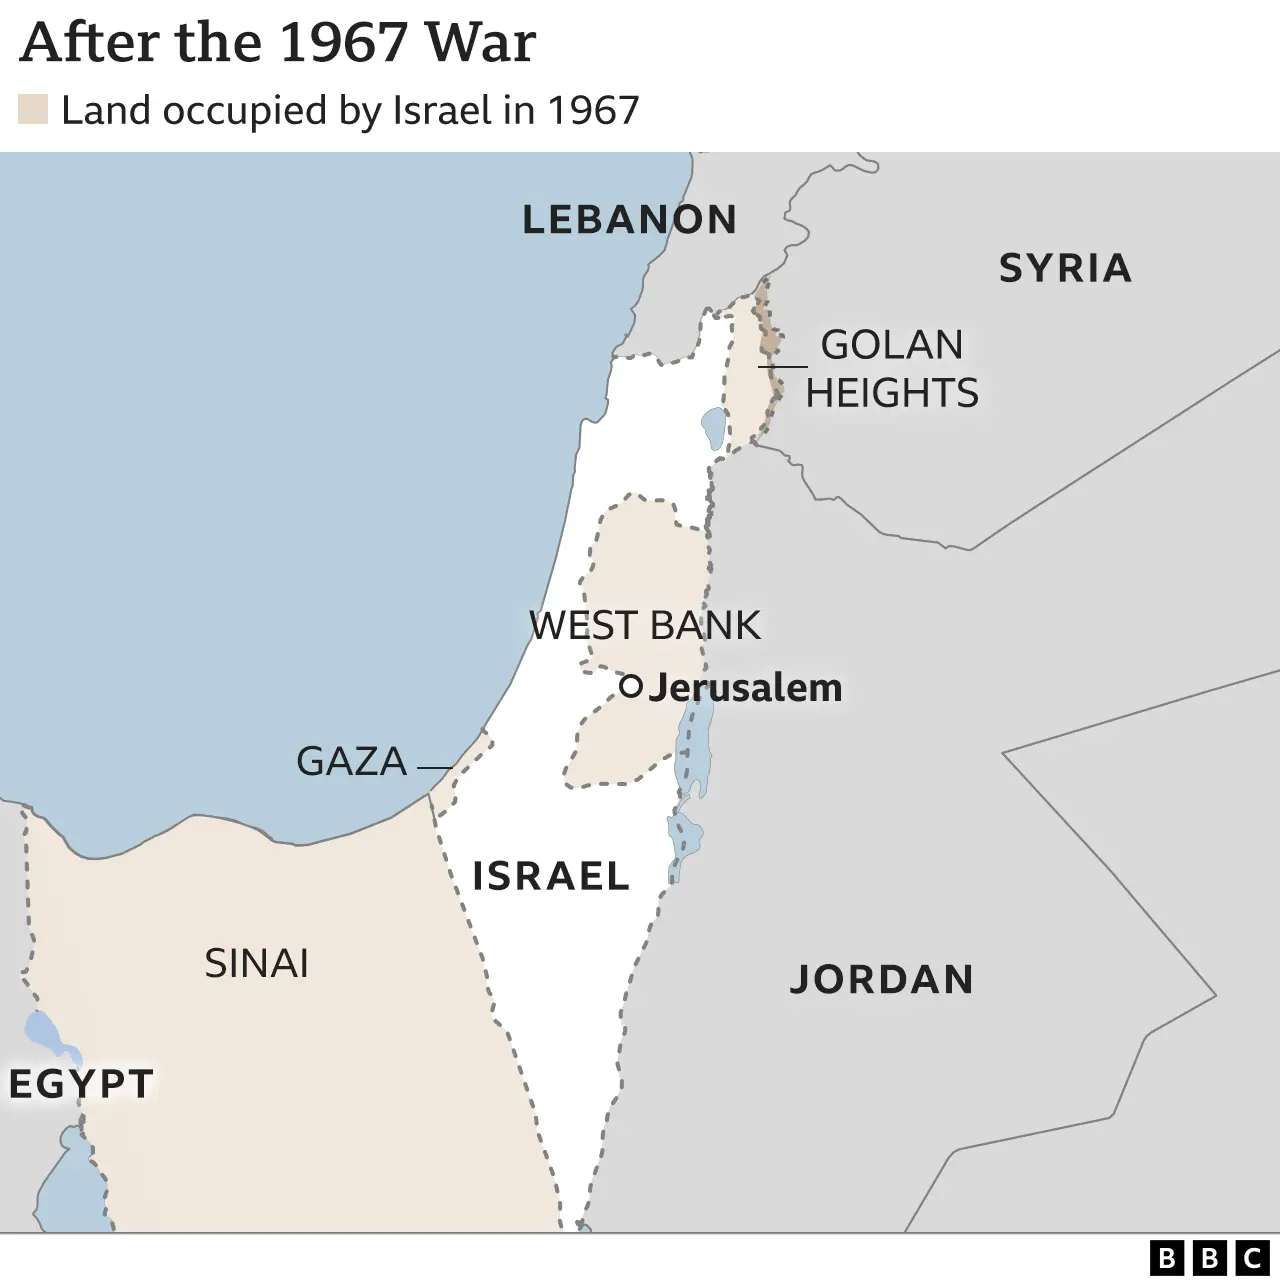 Map showing land occupied by Israel after 1967 war